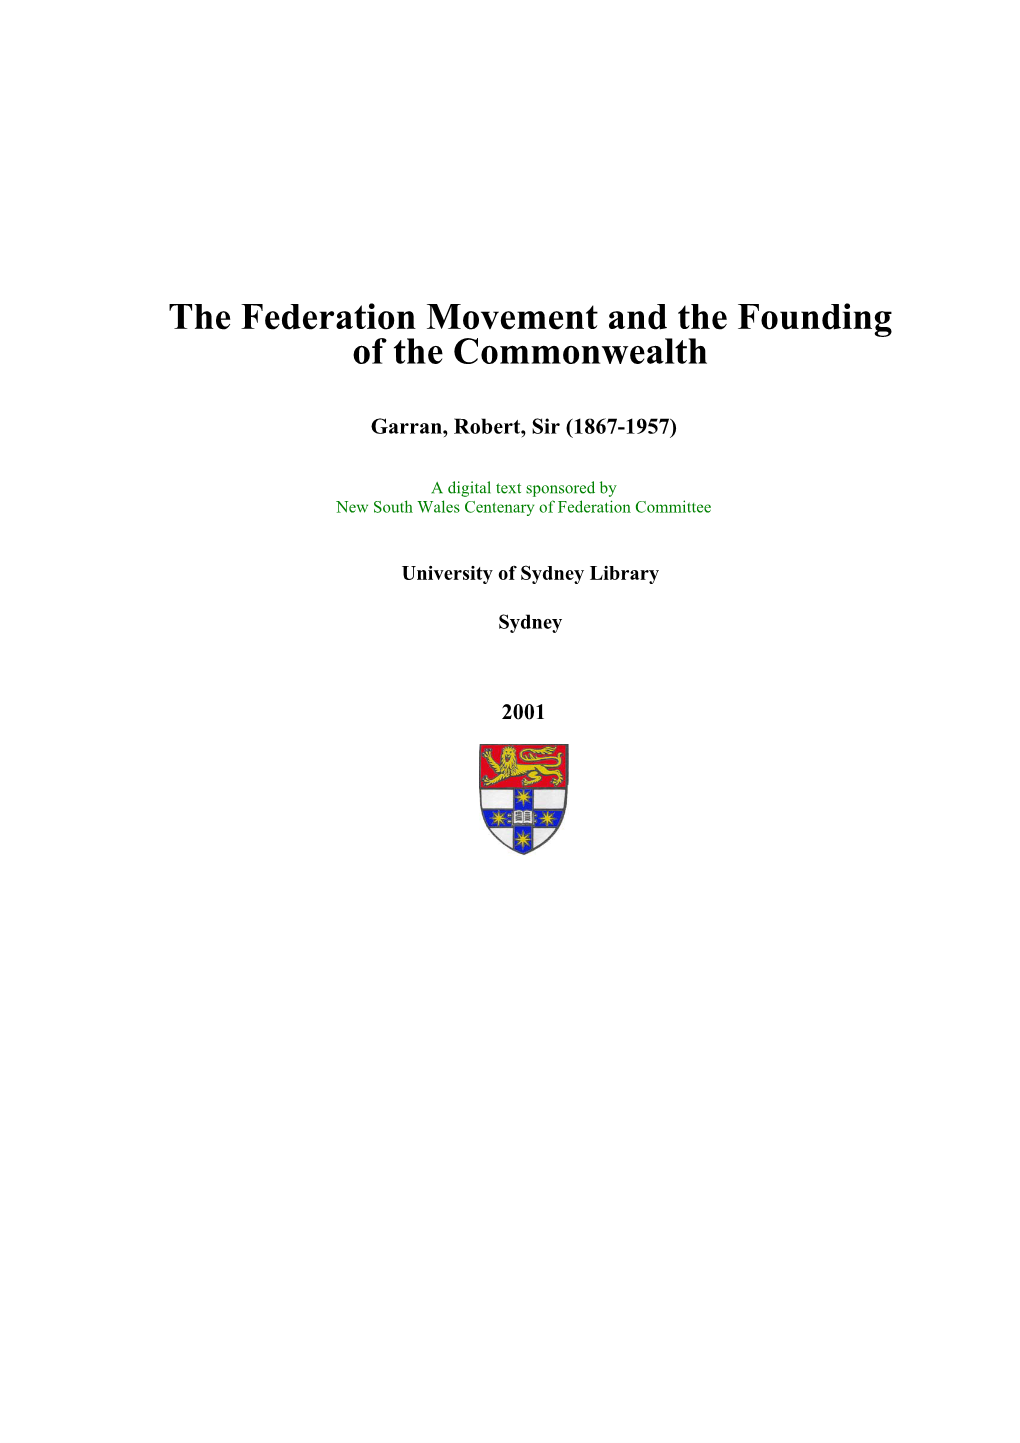 The Federation Movement and the Founding of the Commonwealth